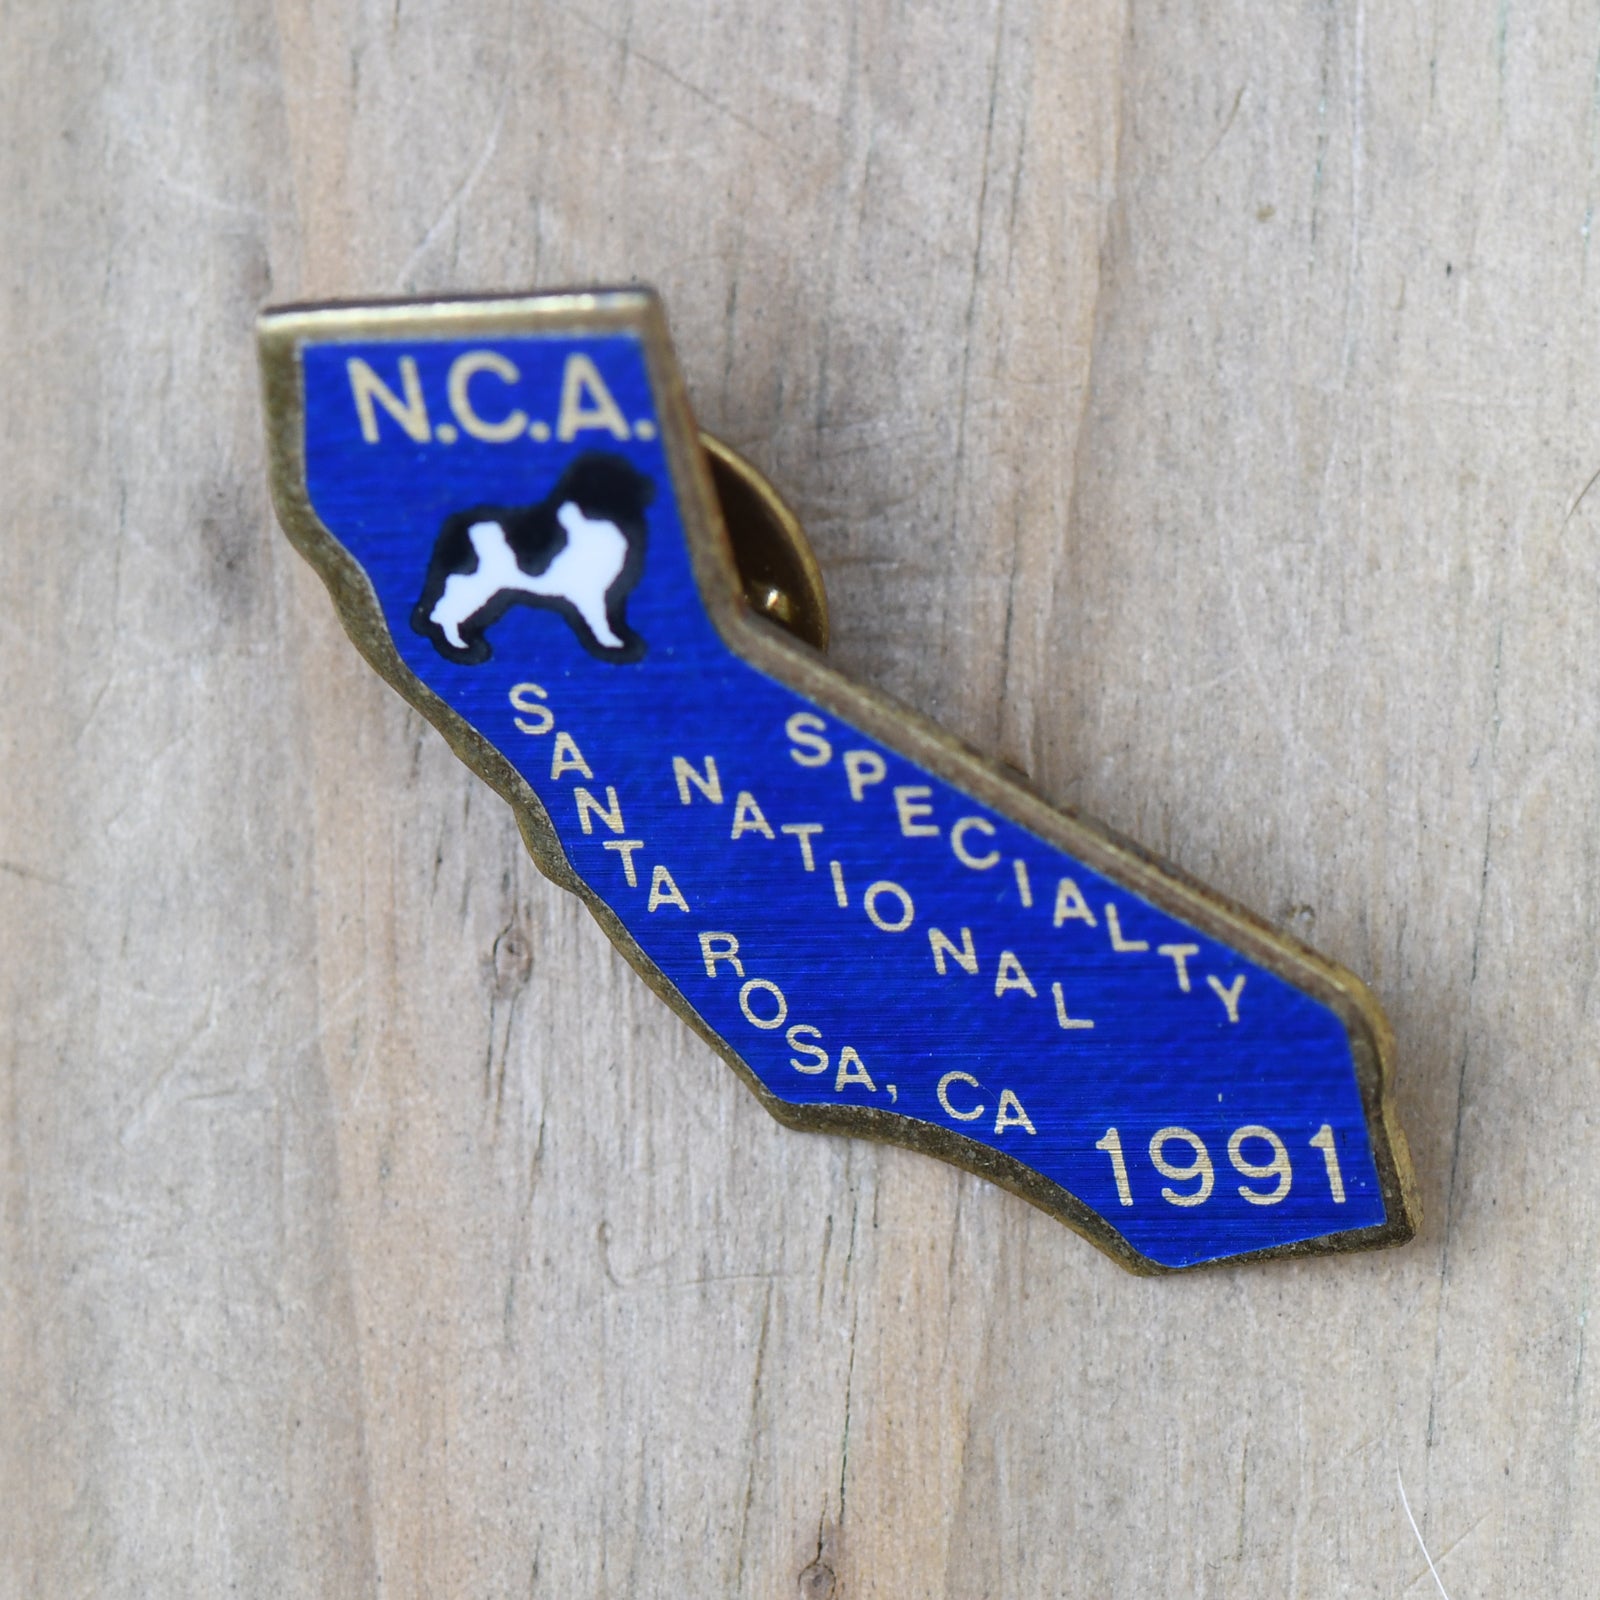 1991 NCA National Specialty pin